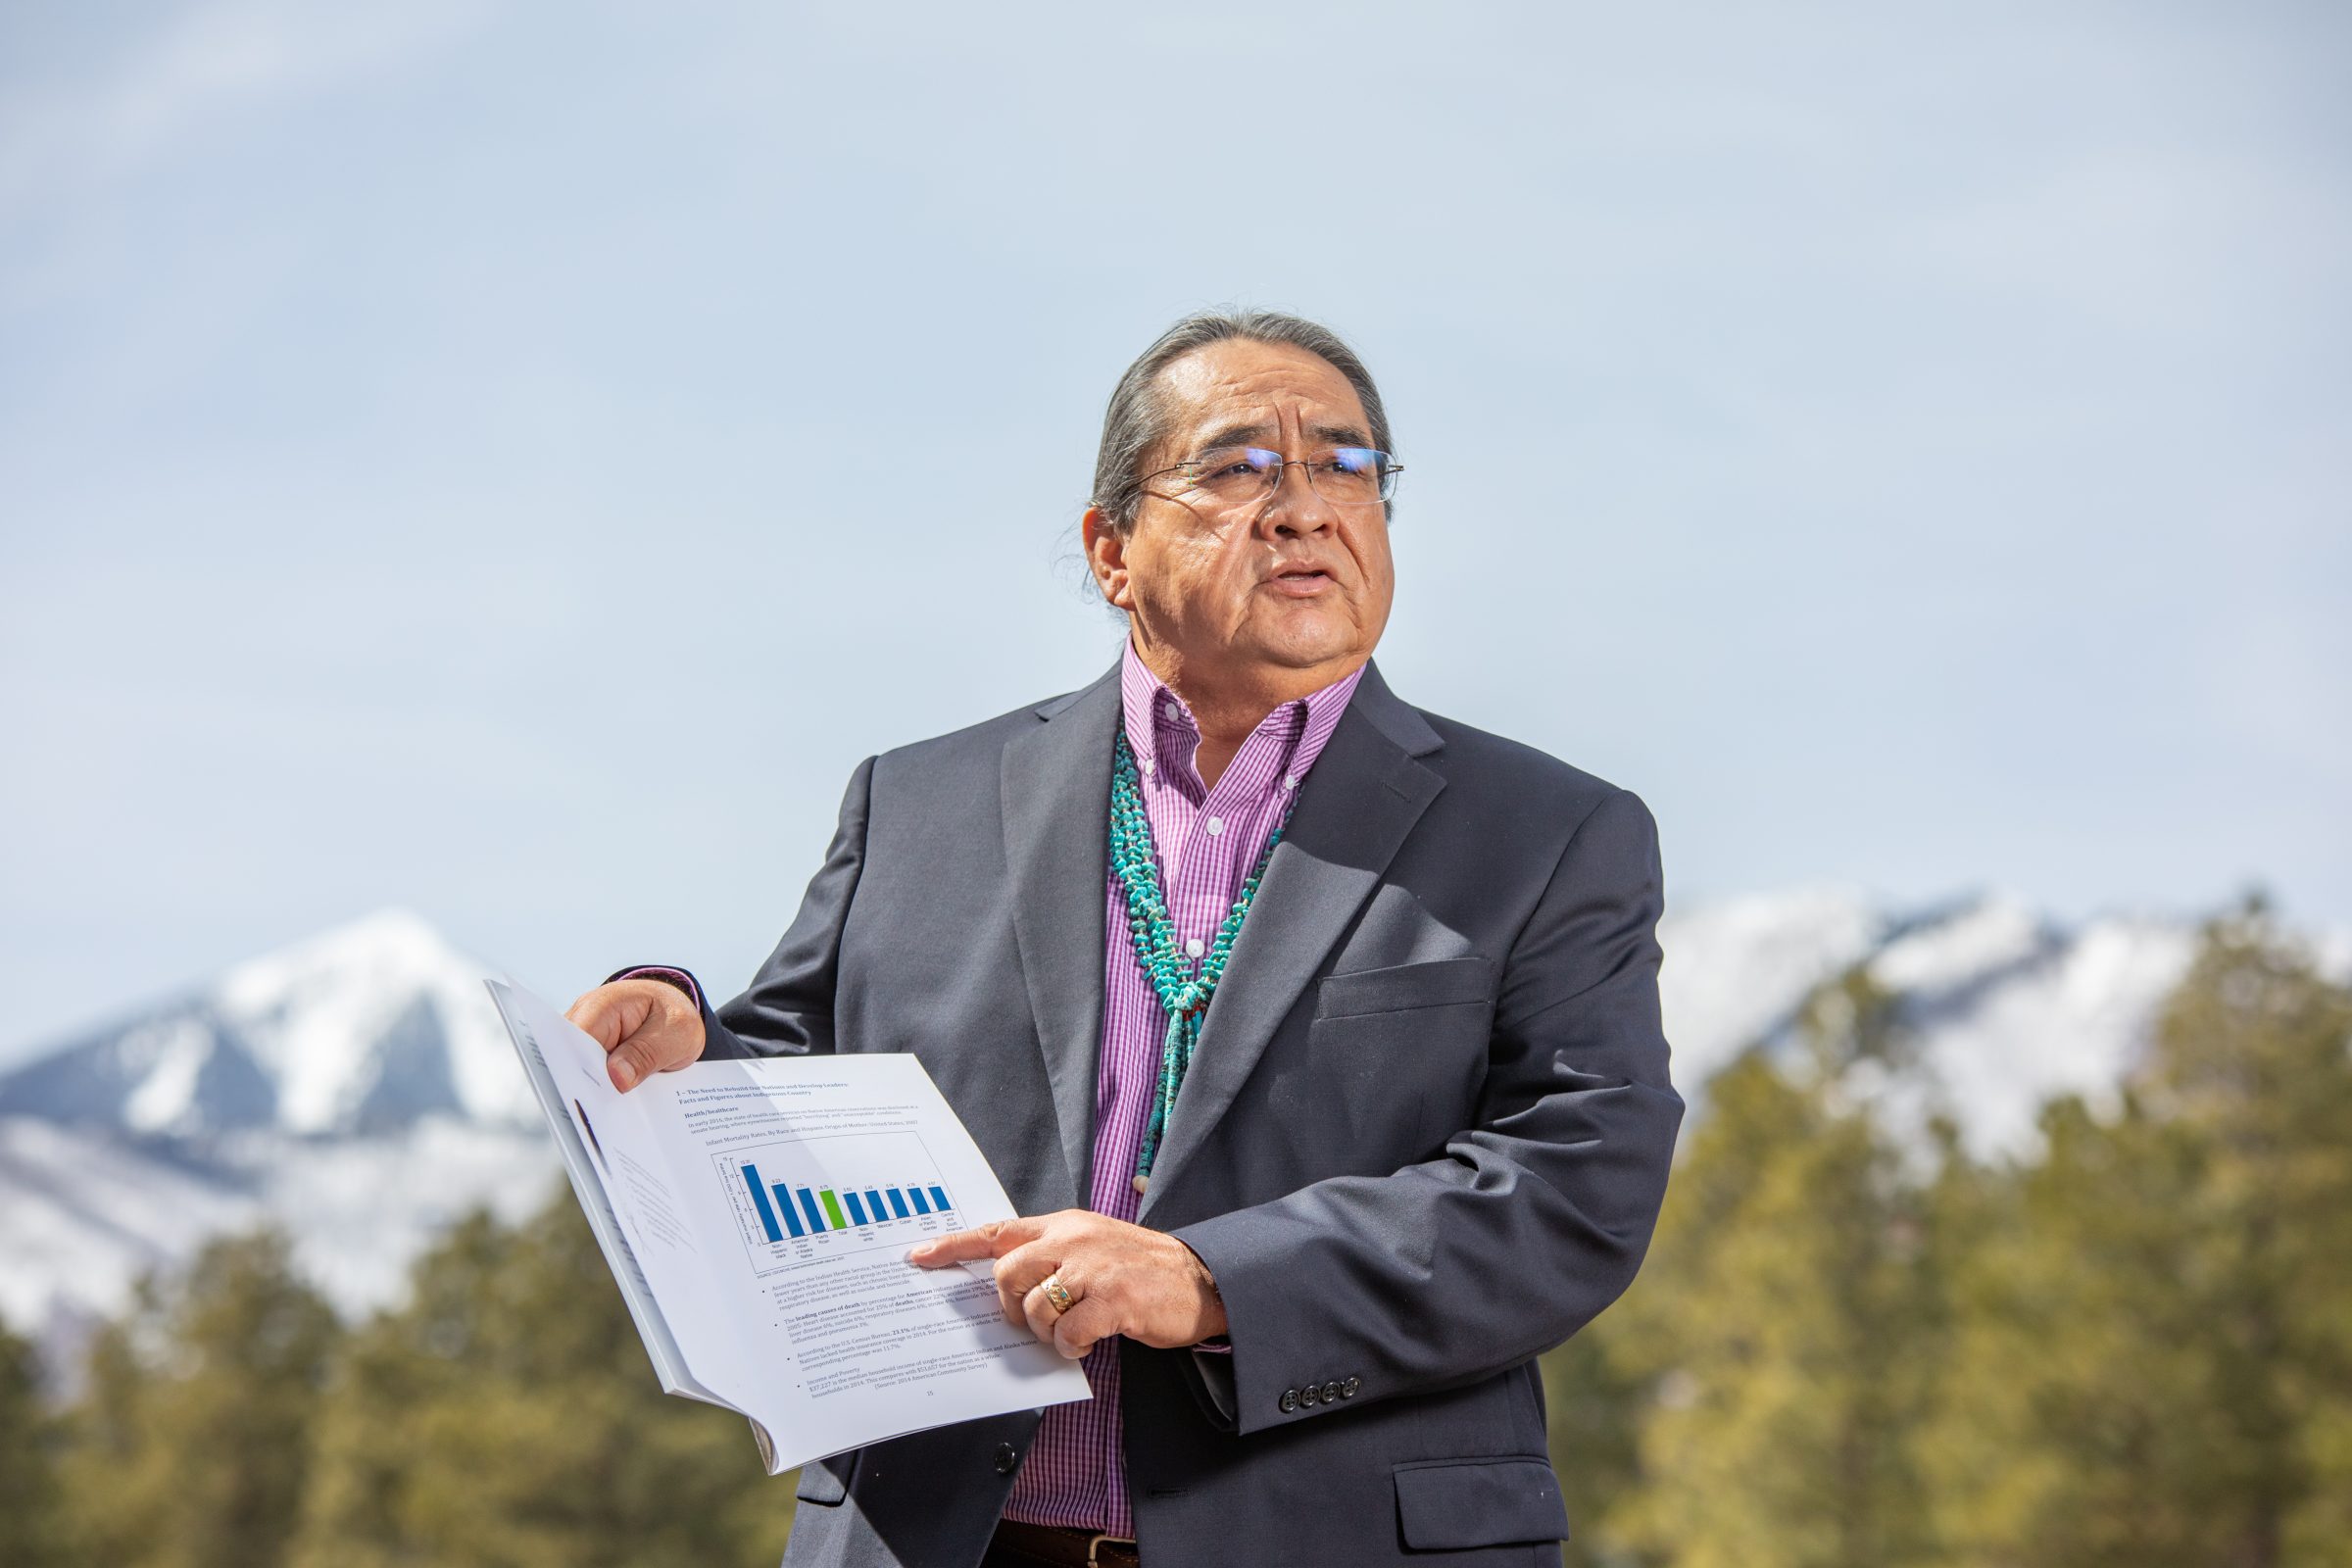 Manley Begay holds a chart and stands with mountain peaks behind him